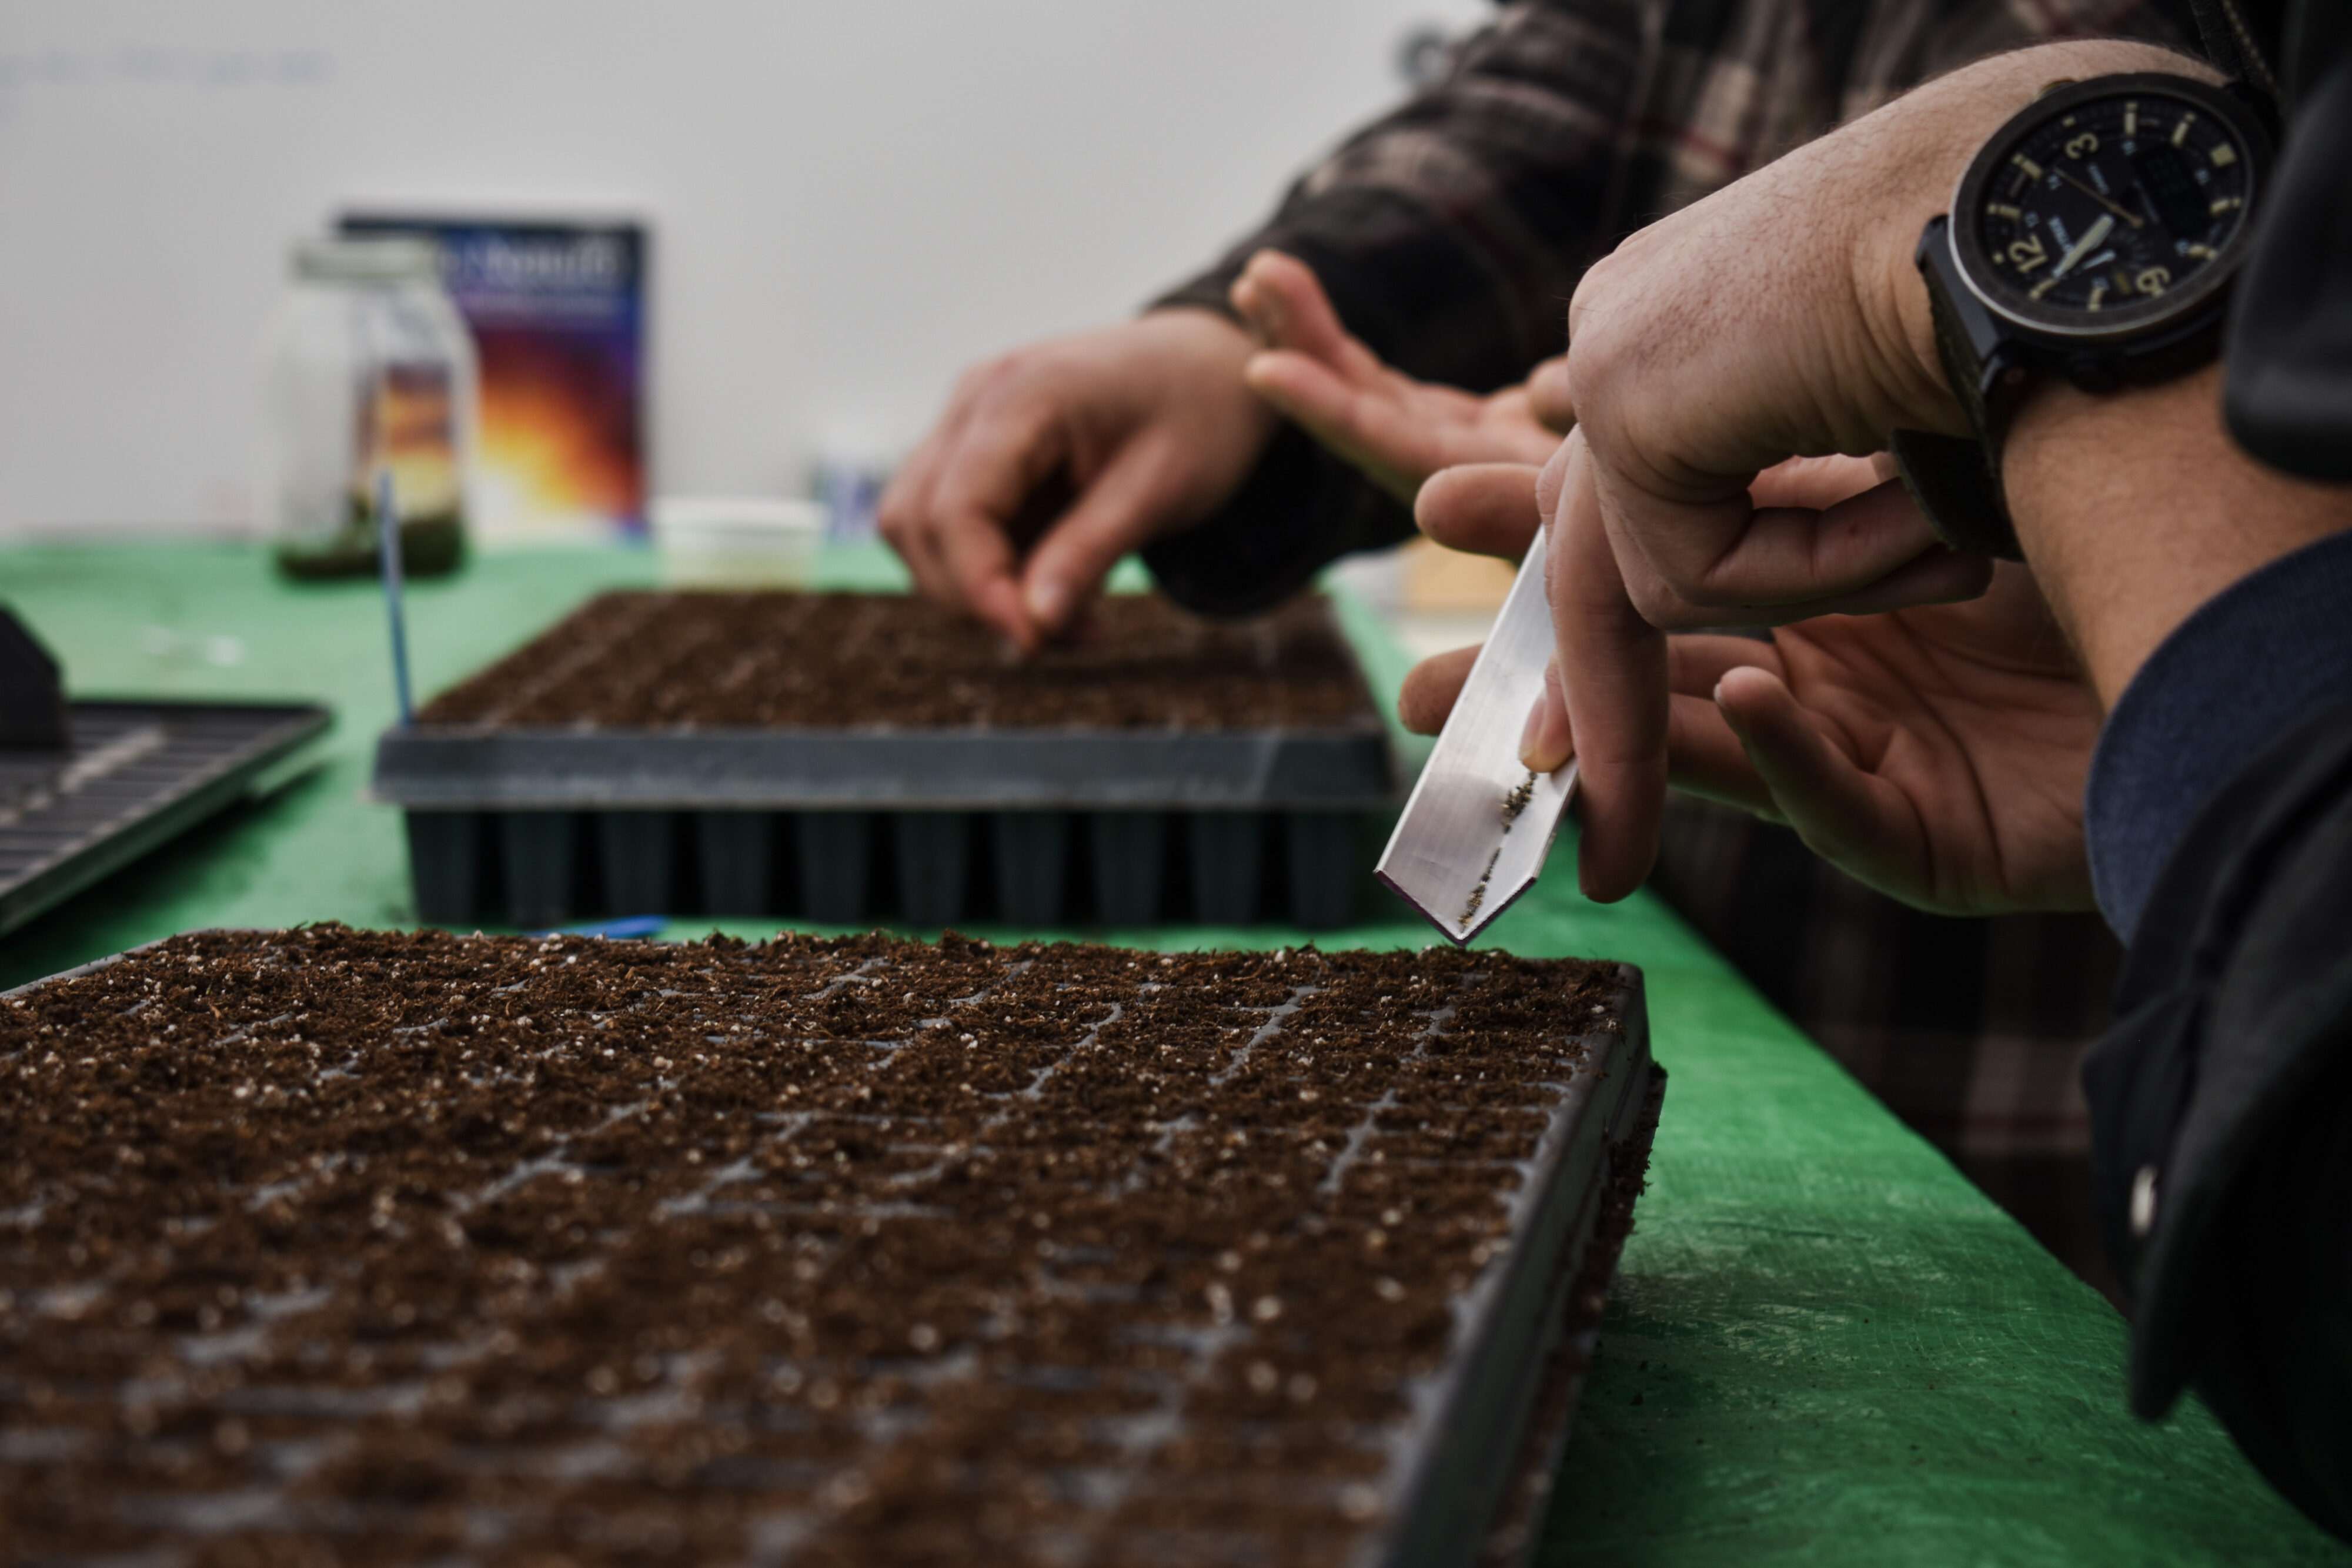 A close-up of hands planting wildflower seeds in cartons.